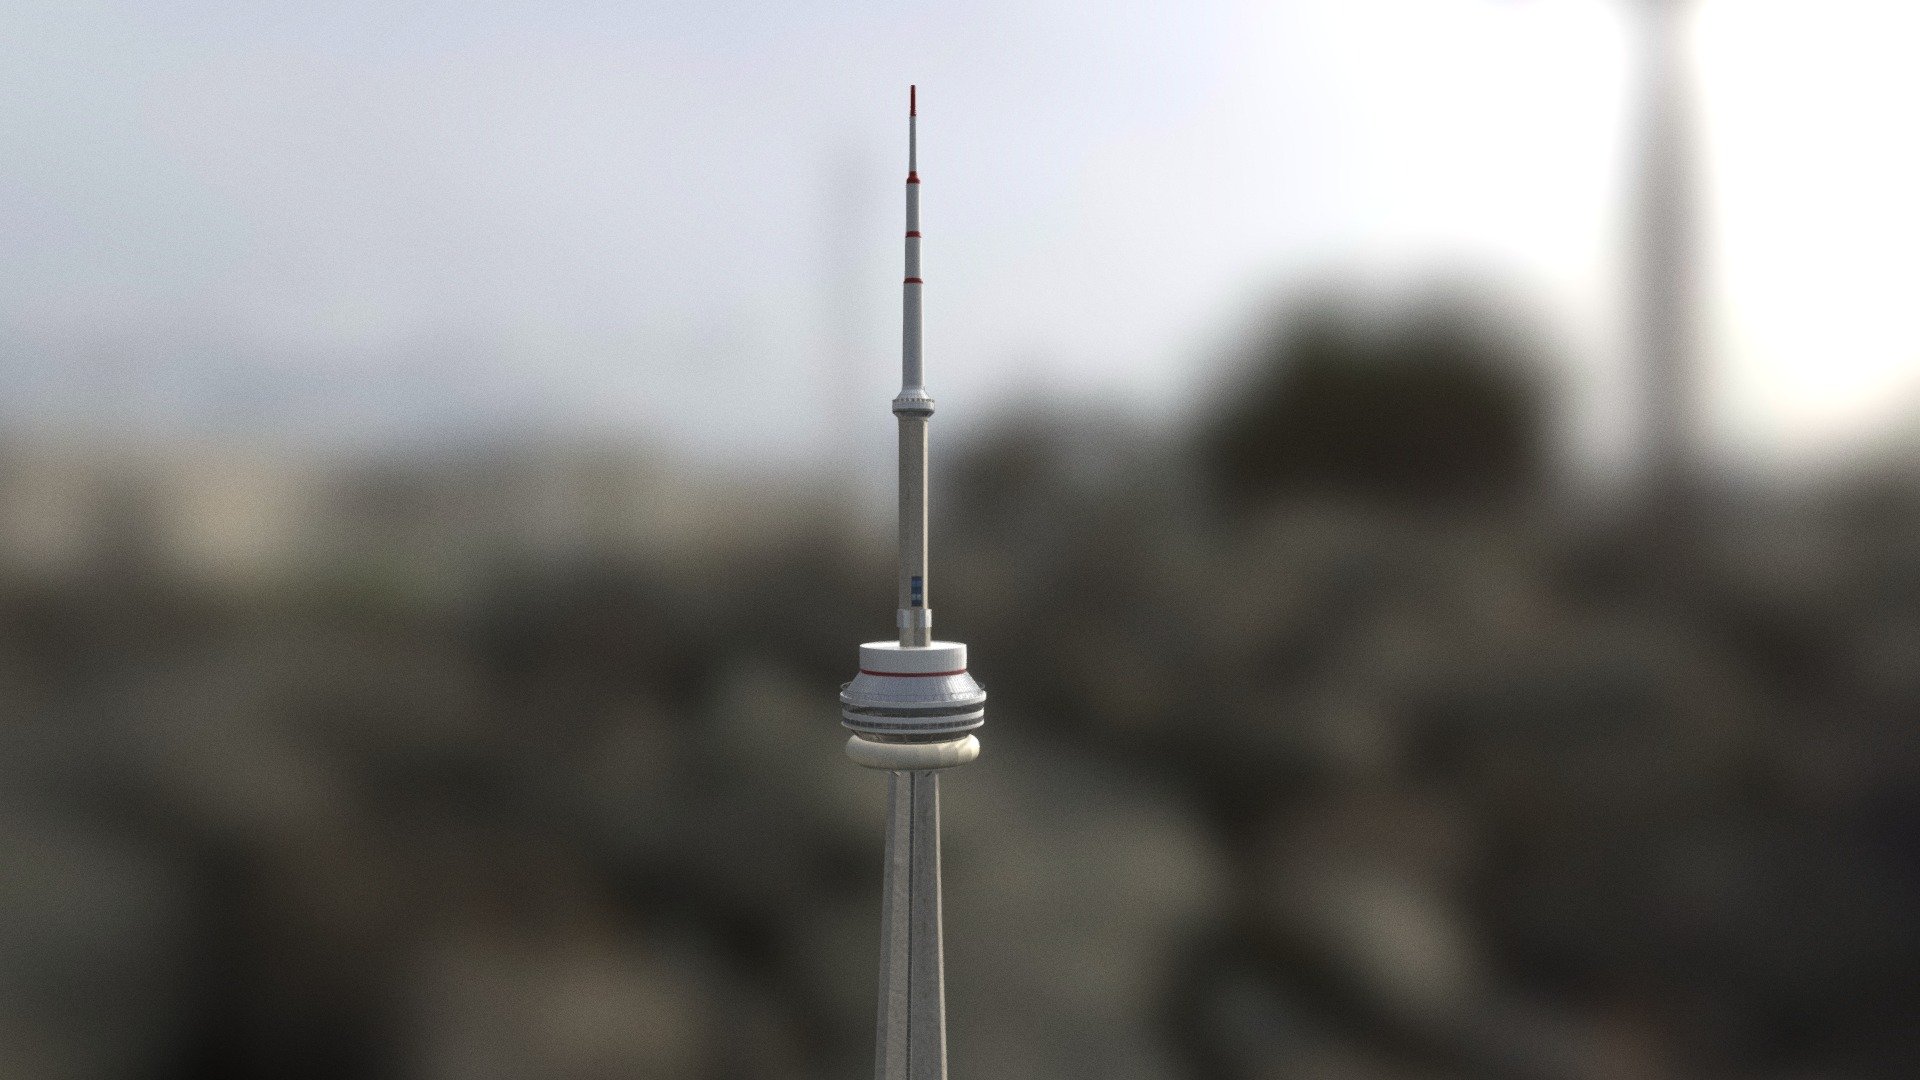 Toronto's Icon Cn Tower Modeled in Maya,
Individual Objects Unwrapped Rendered in Vray.
Concerete Texture File attached , The rest is just solid color with a ramp texture attached.

.::PRODUCT DESCRIPTION::.
.ma, .mb - Autodesk Maya .obj .fbx .stp files, which are the most compatible formats for most softwares you use.

The model was rendered using smooth preview.
Most welcome to have a look at my other models which might be useful for you by clicking on &lsquo;planetvfx'

If you have any issues or additional request, please contact me anytime on my email. I will be happy to help 3d model